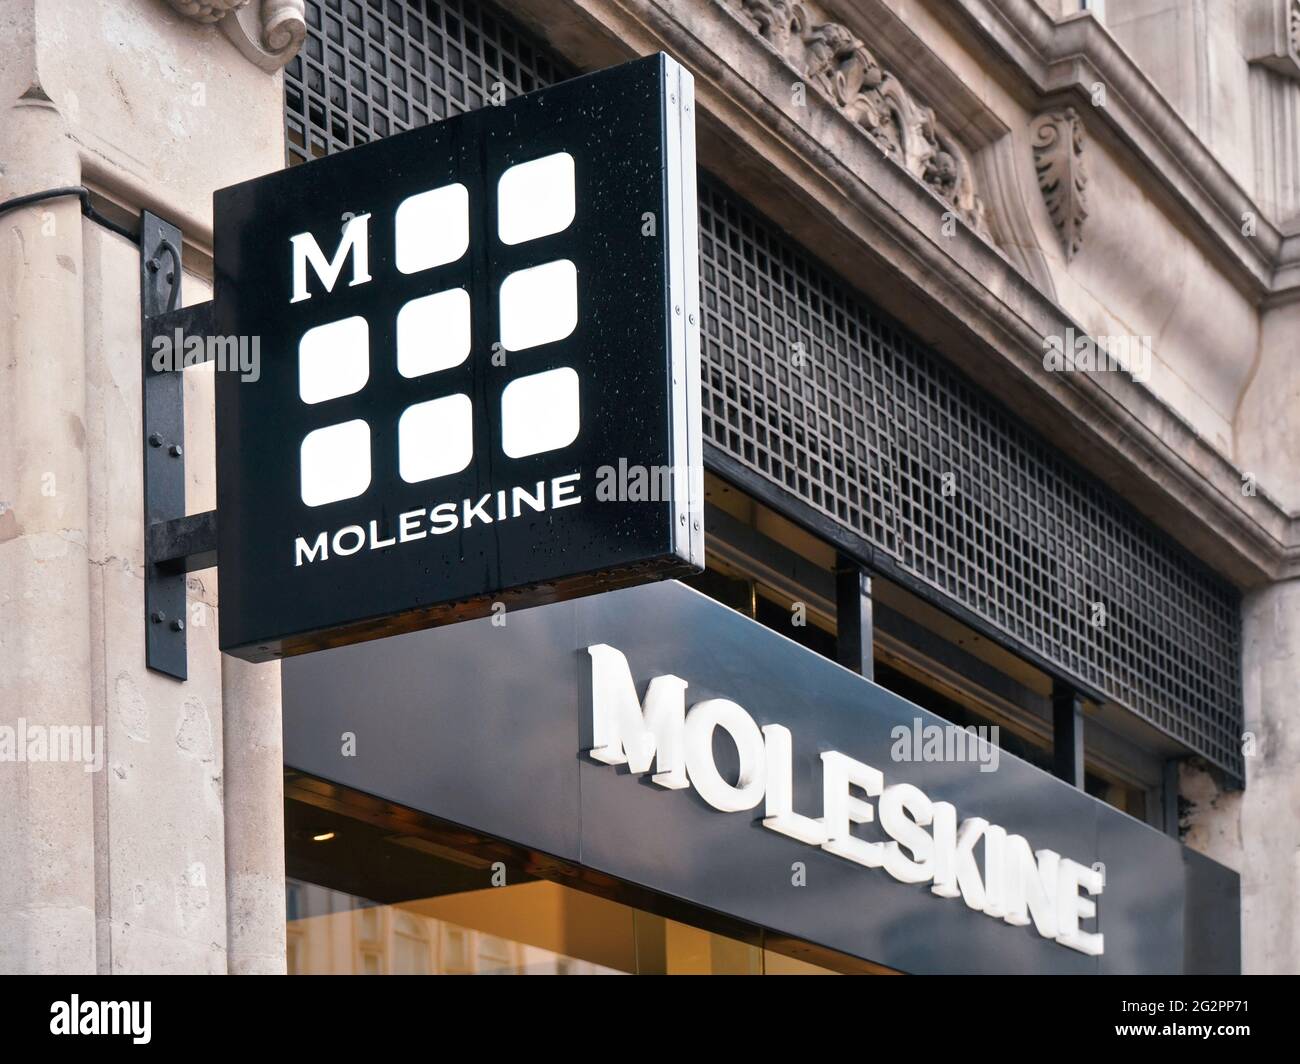 London, United Kingdom - February 01, 2019: Black and white Moleskine logo on their shop at Oxford Street. It is Italian paper and stationery manufact Stock Photo